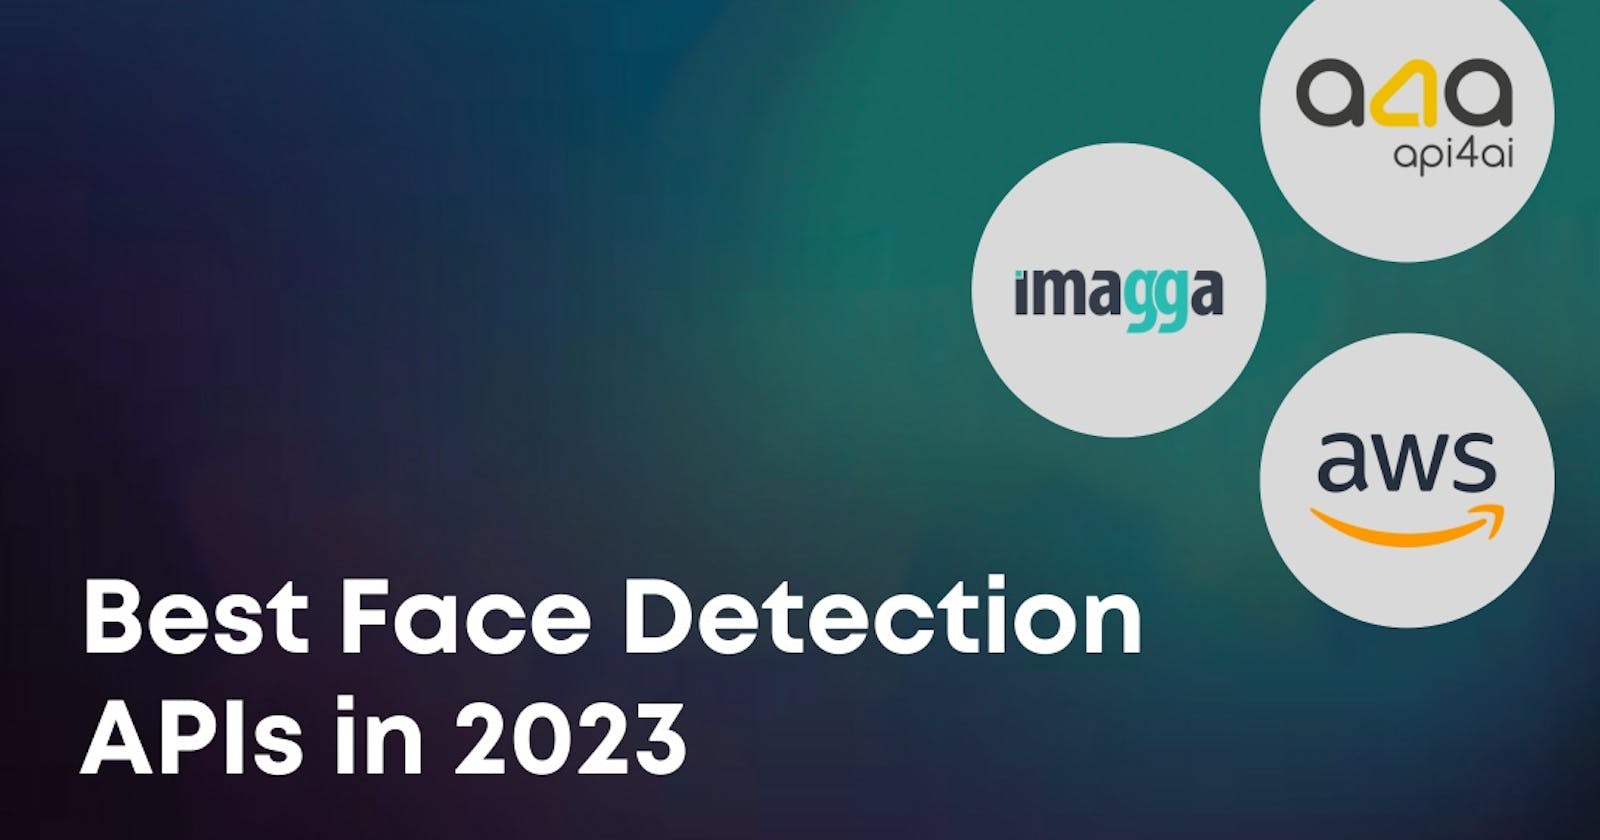 Best Face Detection APIs in 2023